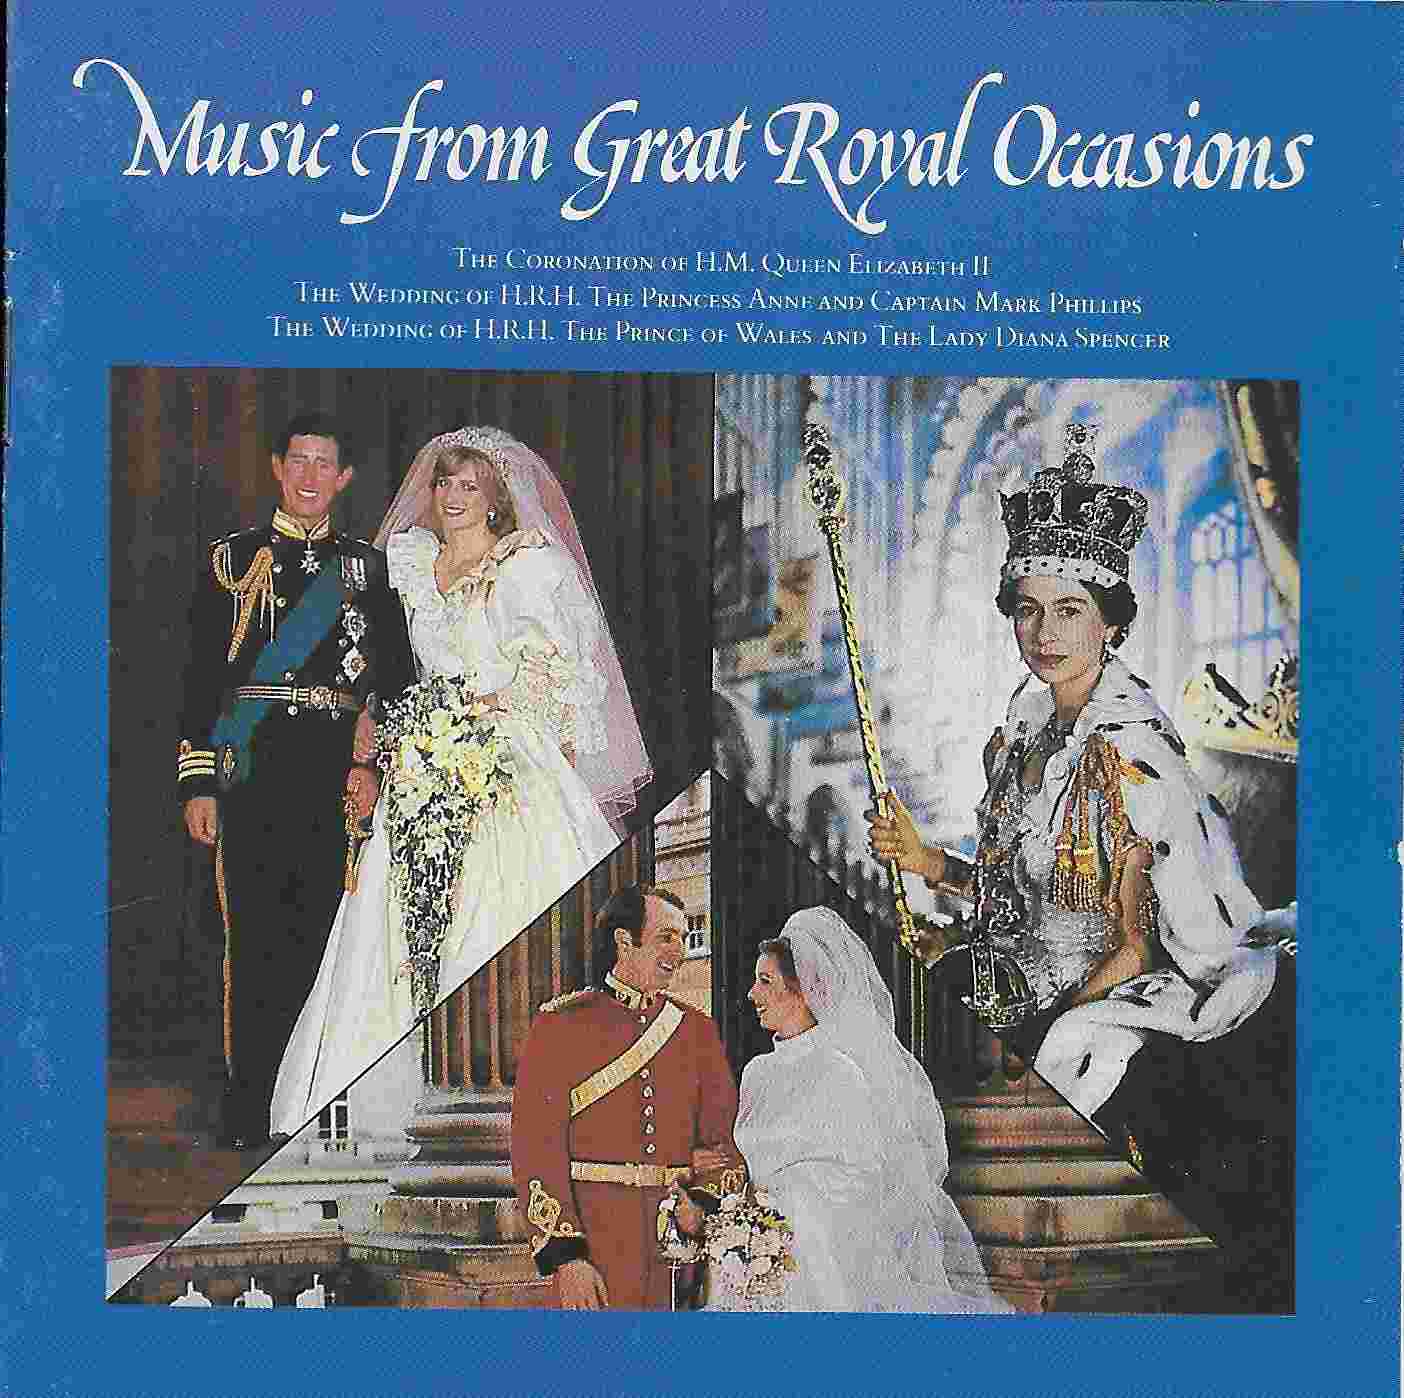 Picture of BBCCD470 Music from great royal occasions by artist Various from the BBC records and Tapes library